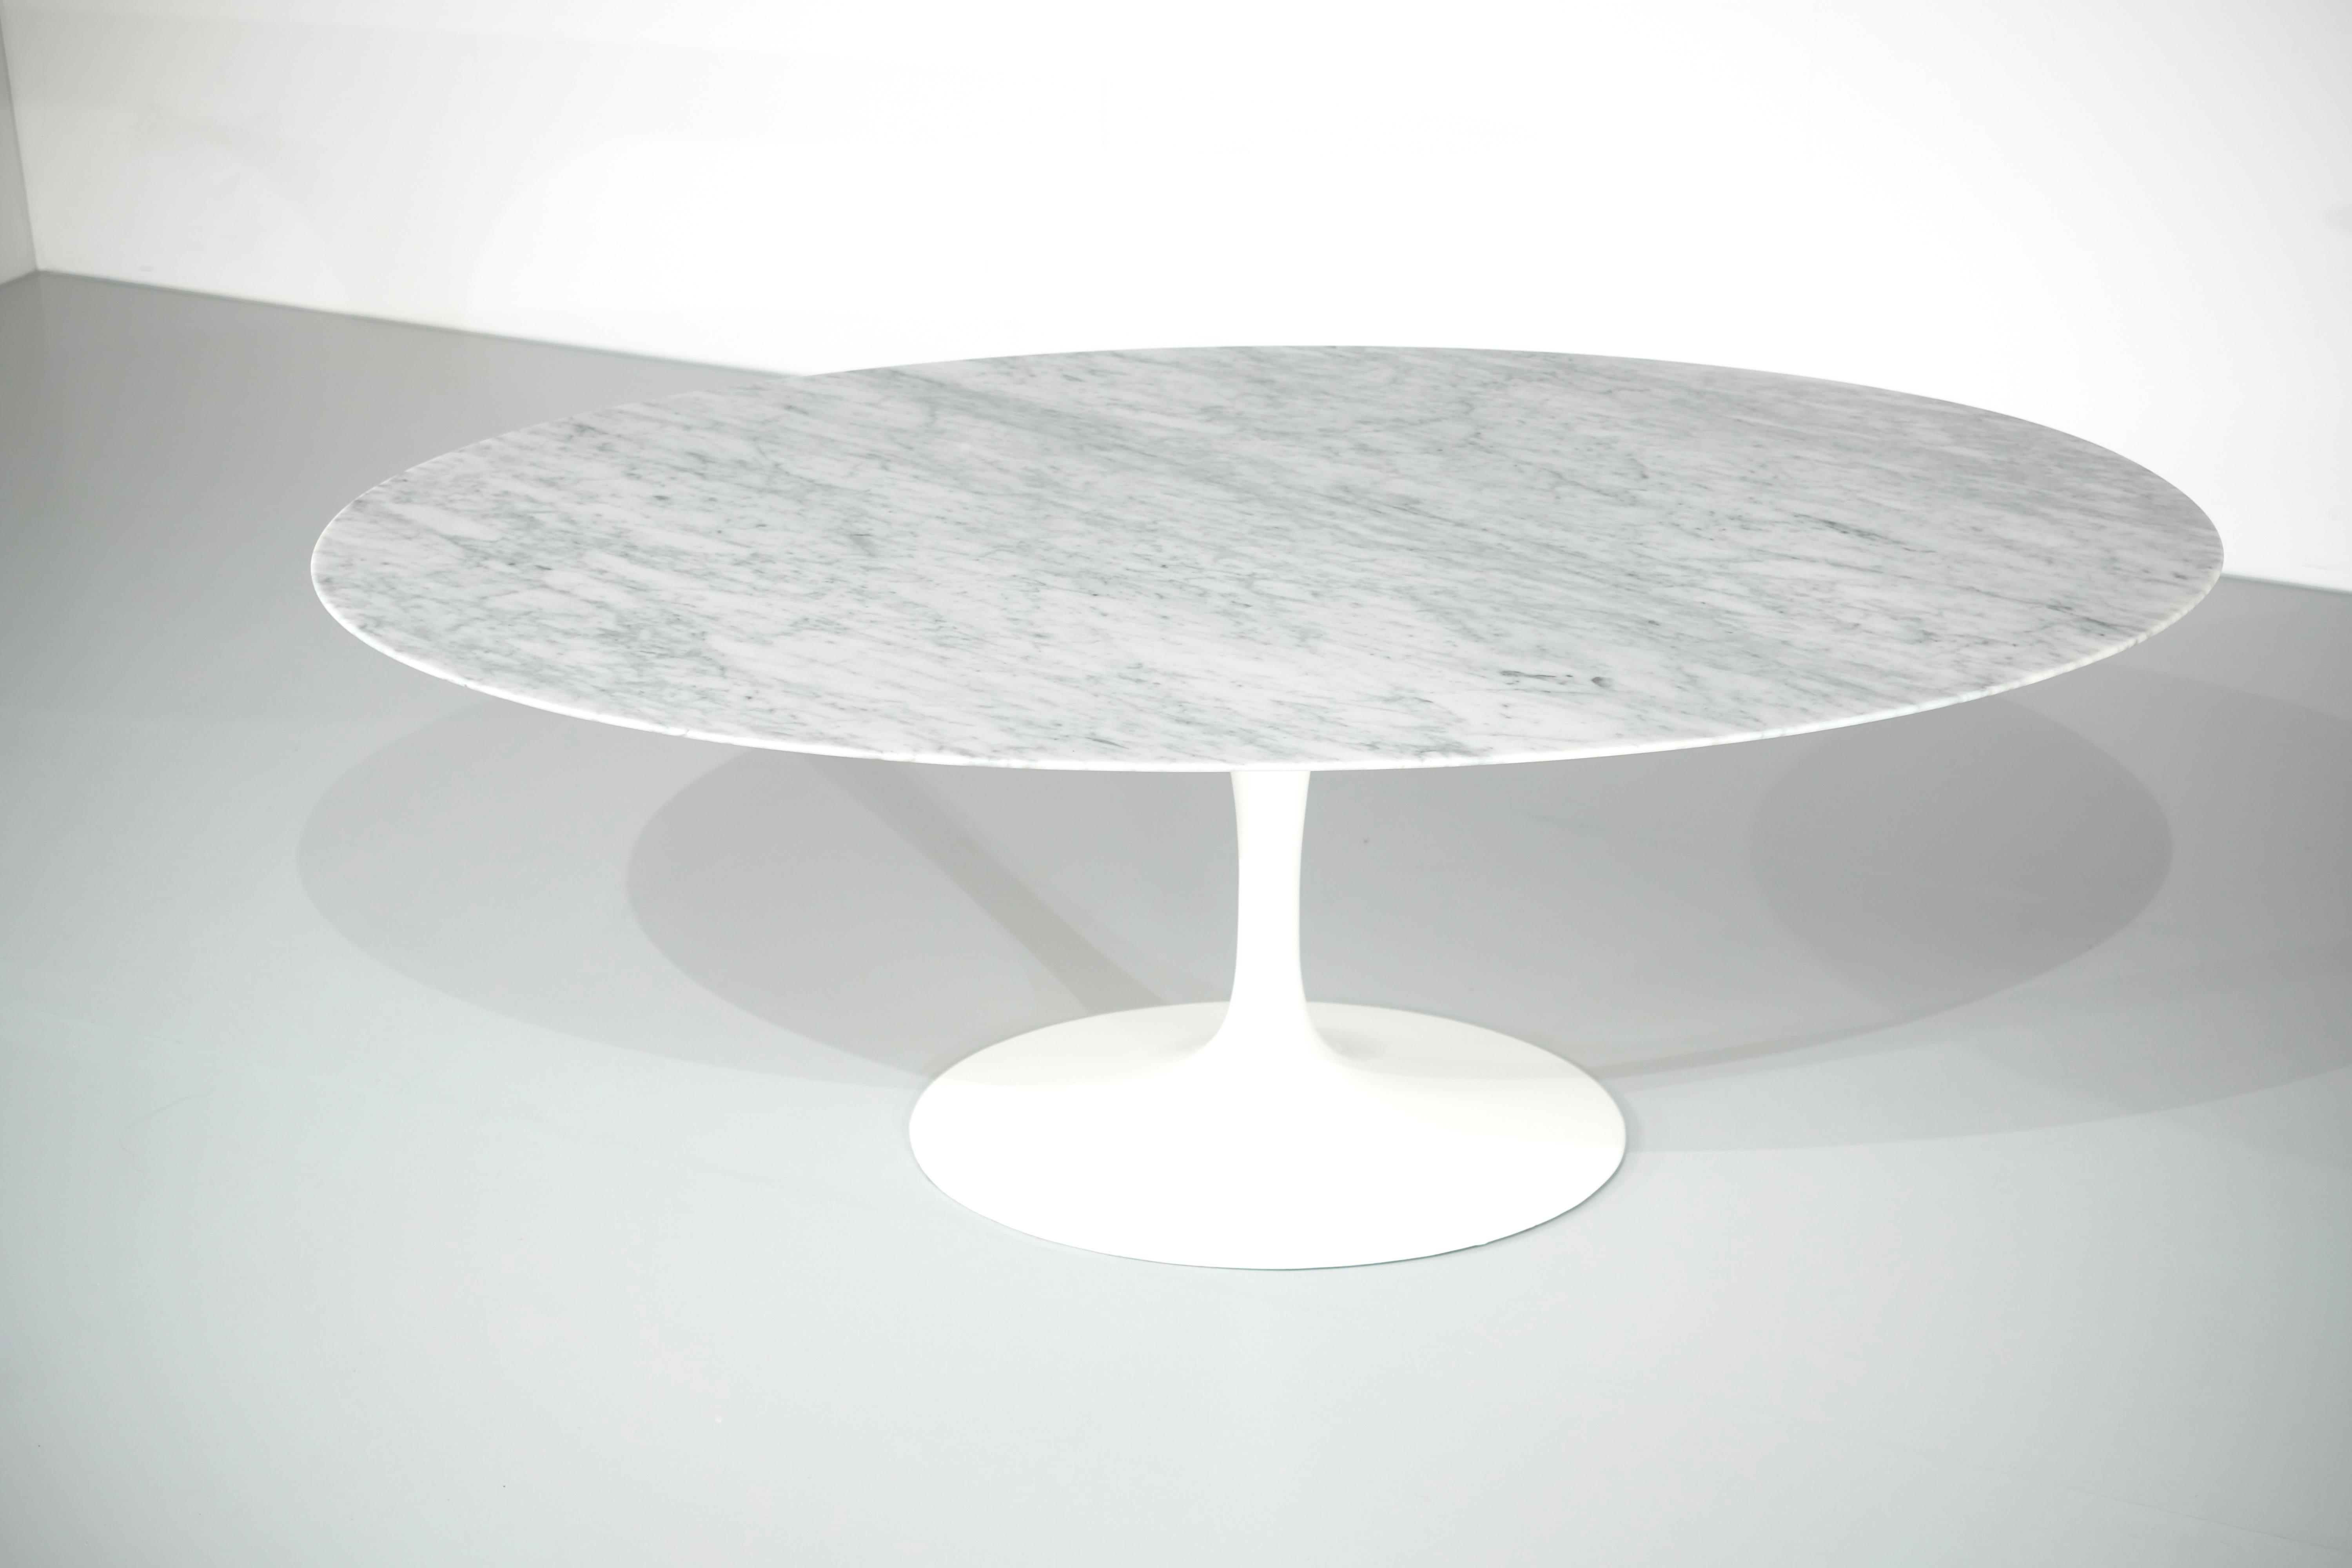 American Table in Marble by Eero Saarinen for Knoll International, USA 1958. For Sale